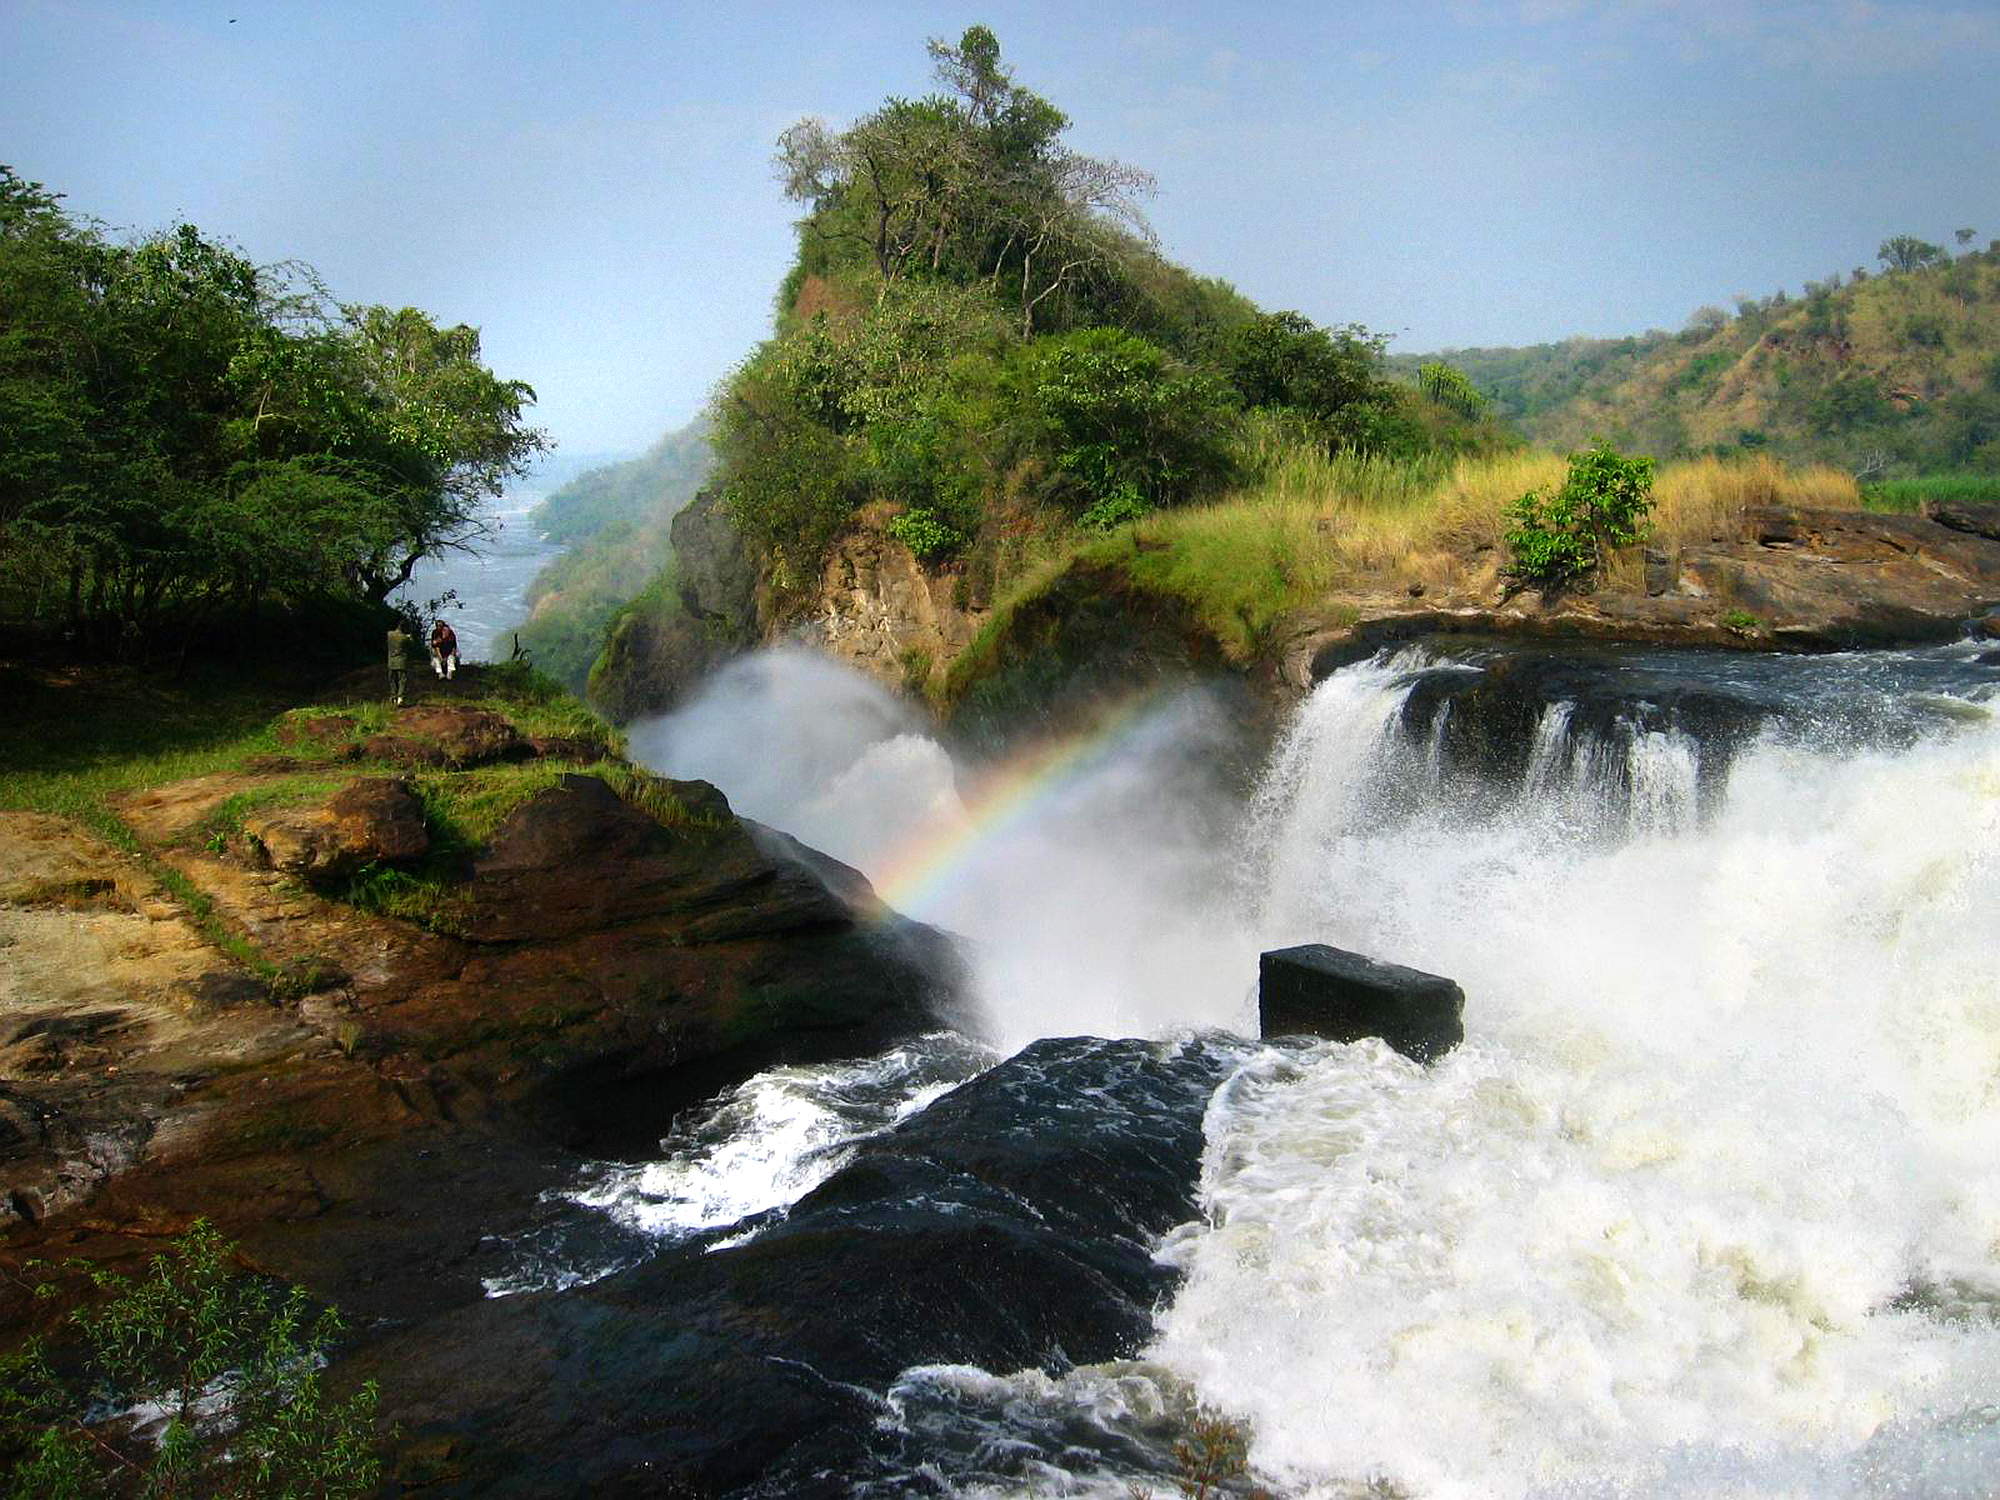 TRANSFER TO MURCHISON FALLS NATIONAL PARK